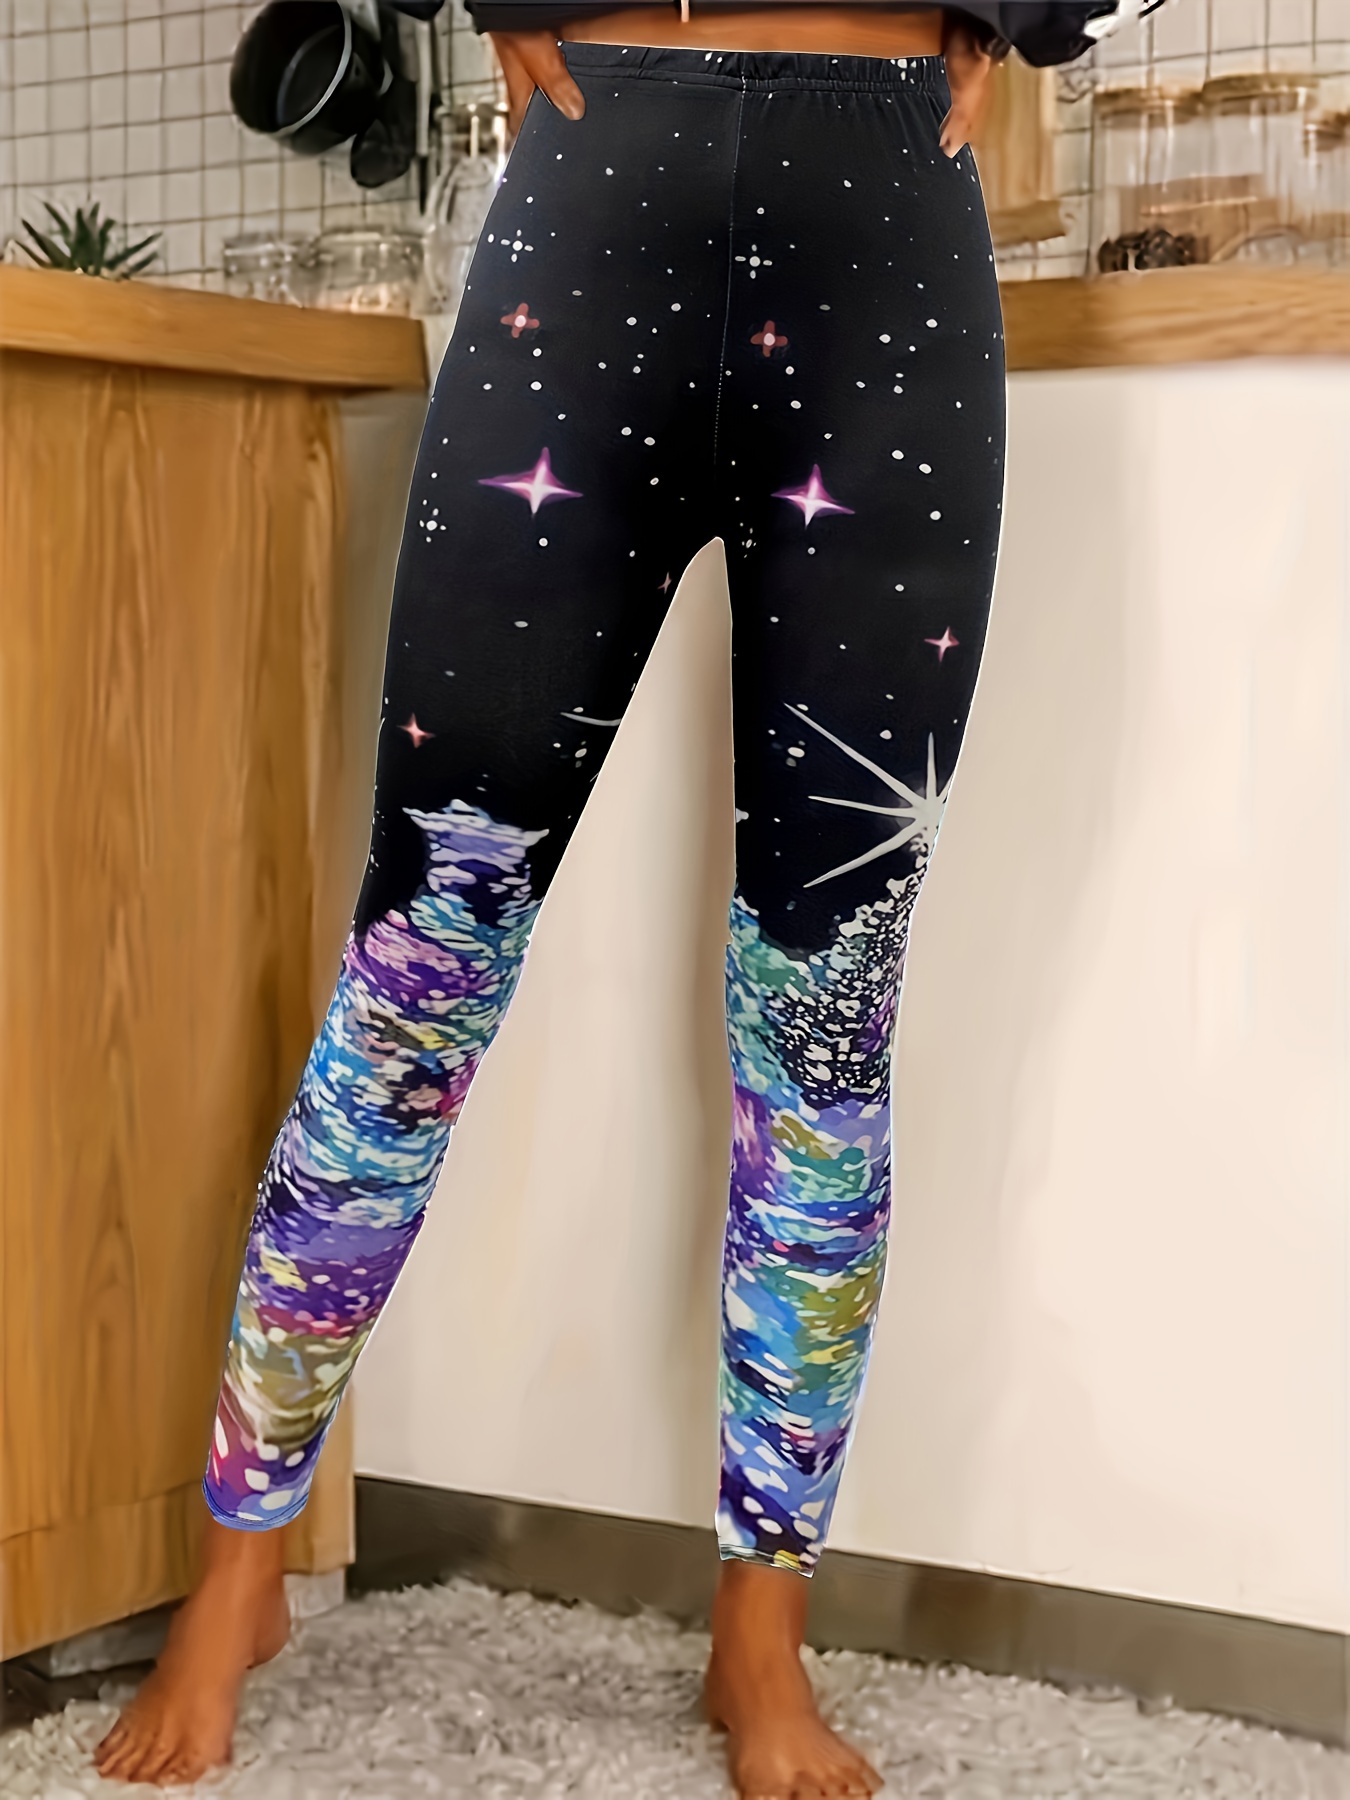 Seamless Printed Patterned Gym Leggings For Gym, Fitness, Running